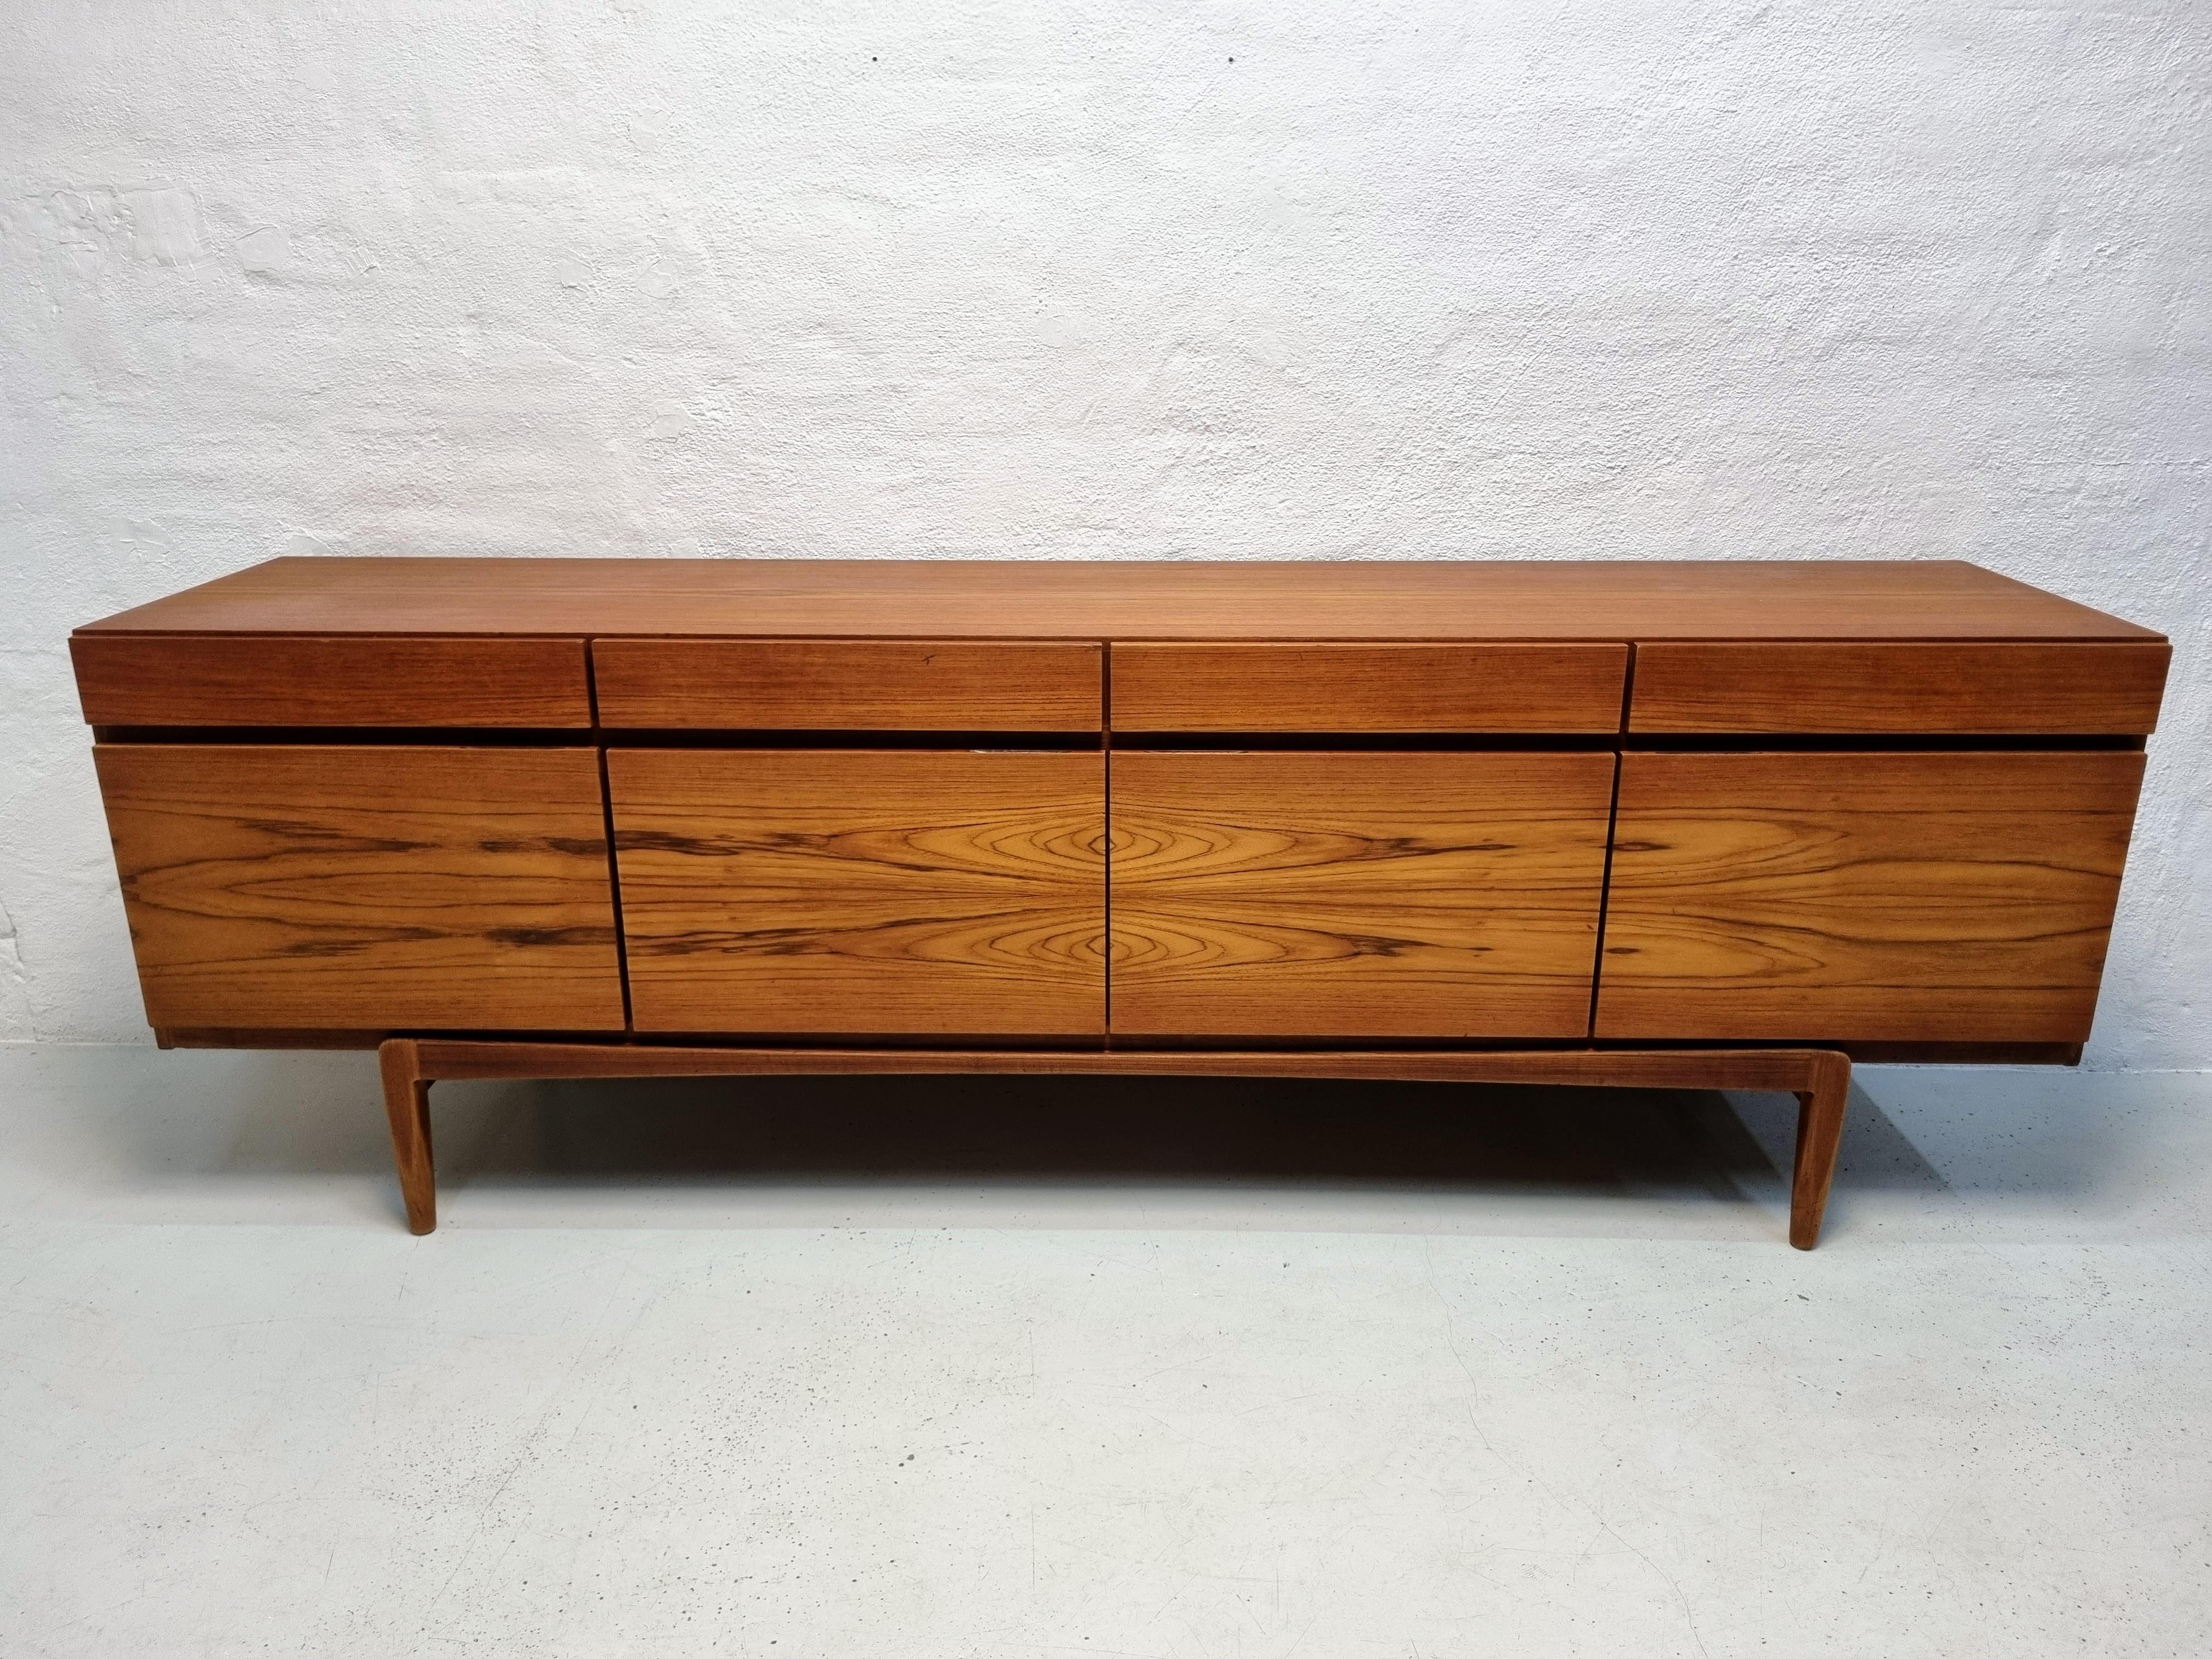 The sideboard Model FA-66 was designed by Ib Kofod Larsen in 1966 for Faarup Møbelfabrik, it is one of the popular designs and it is easy to see why.

This sideboard is made of teak, there are 4 drawers at the top and 4 doors at the bottom, behind